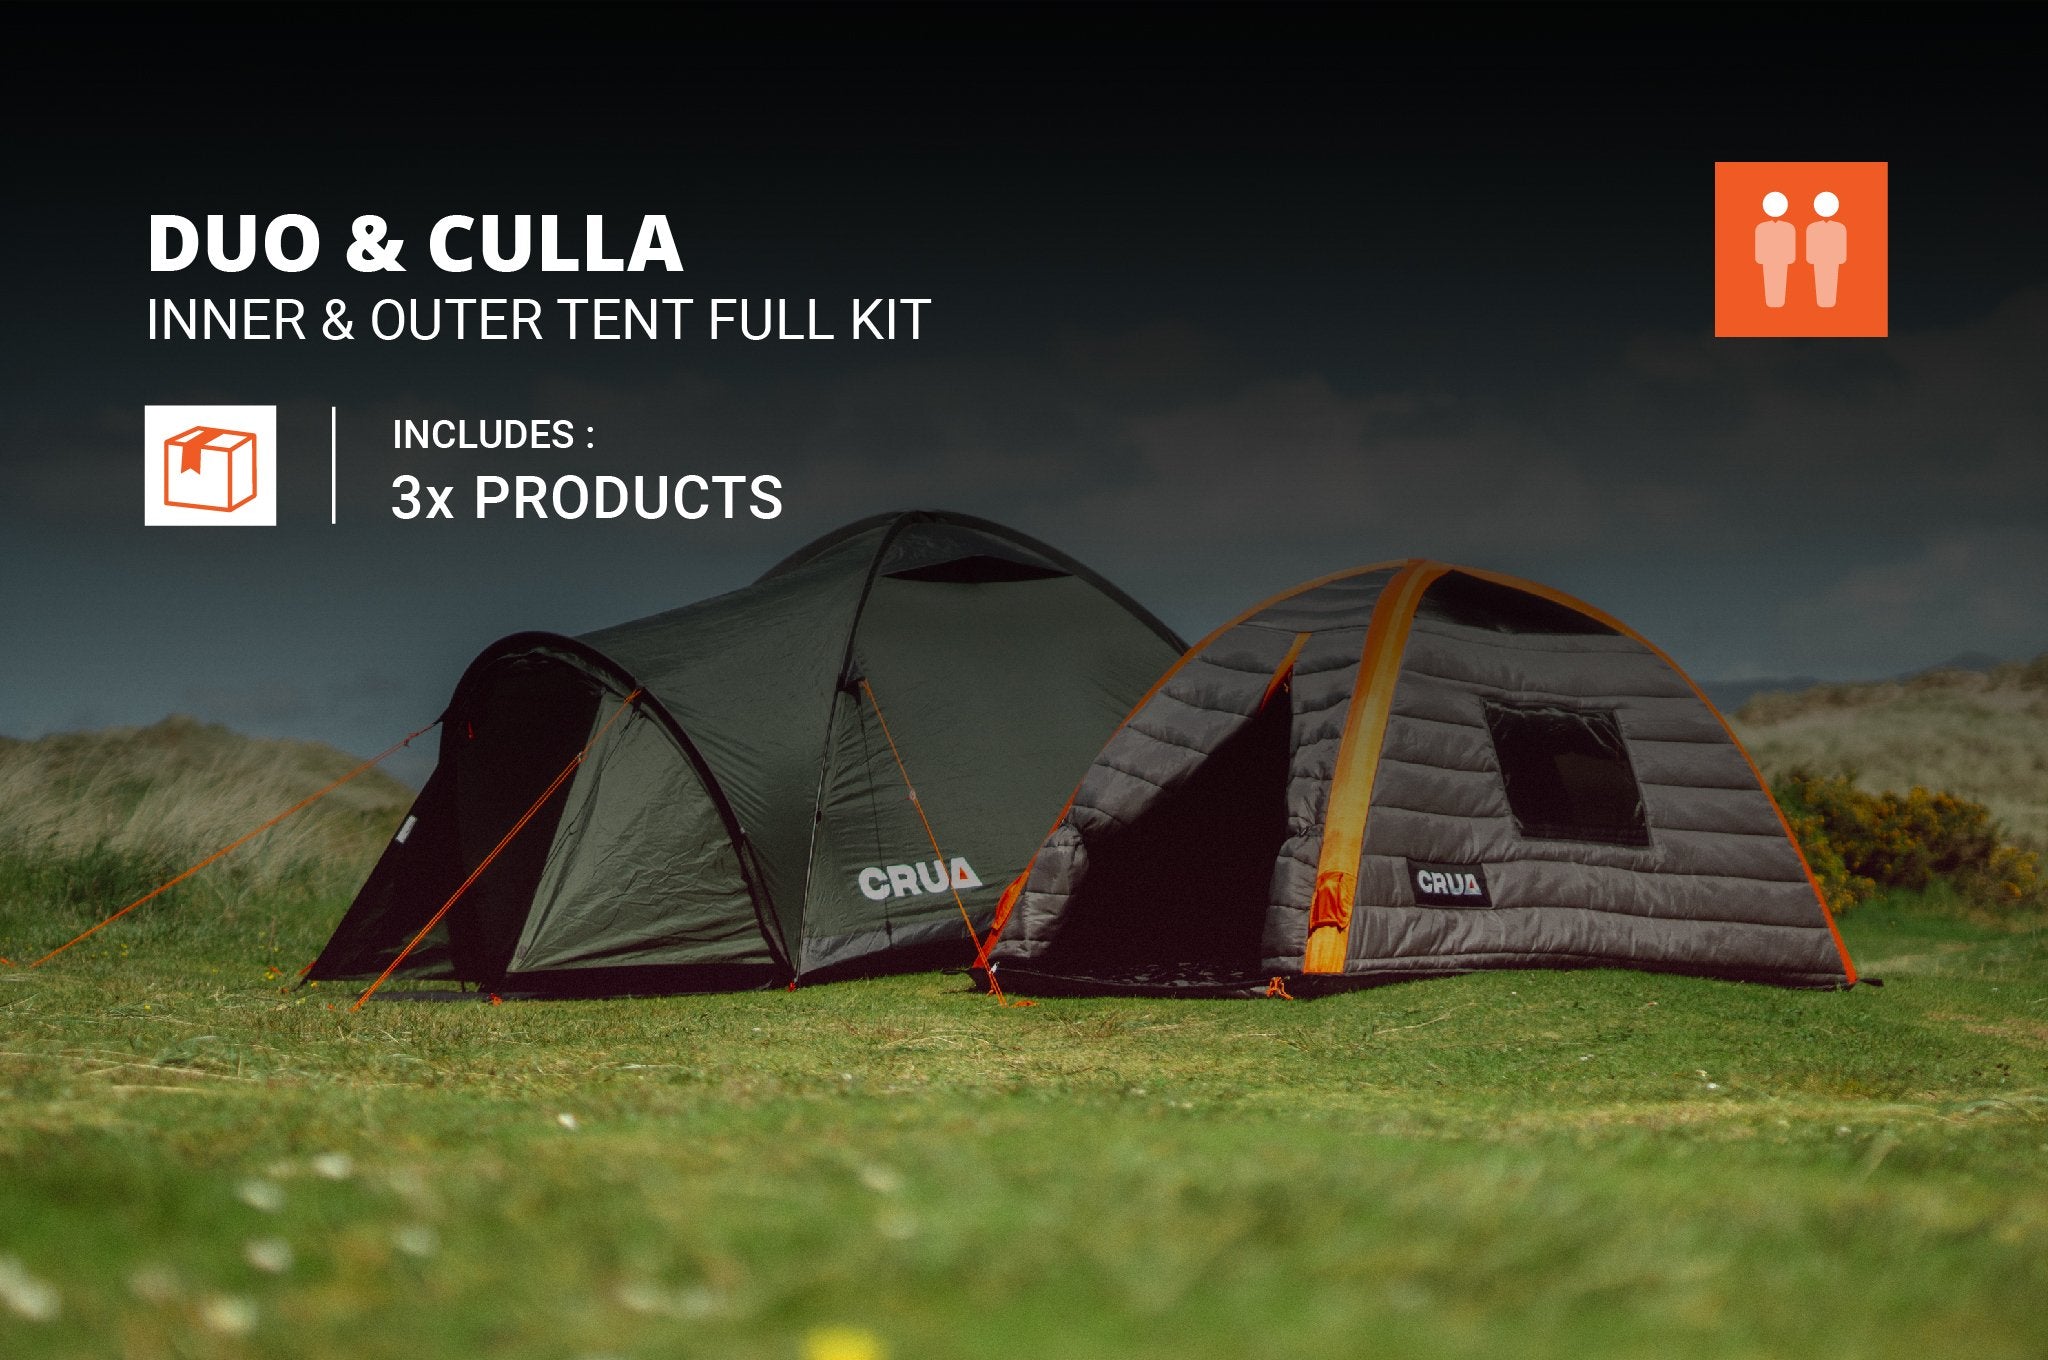 DUO & CULLA | INNER & OUTER TENT FULL KIT | 2 PERSON